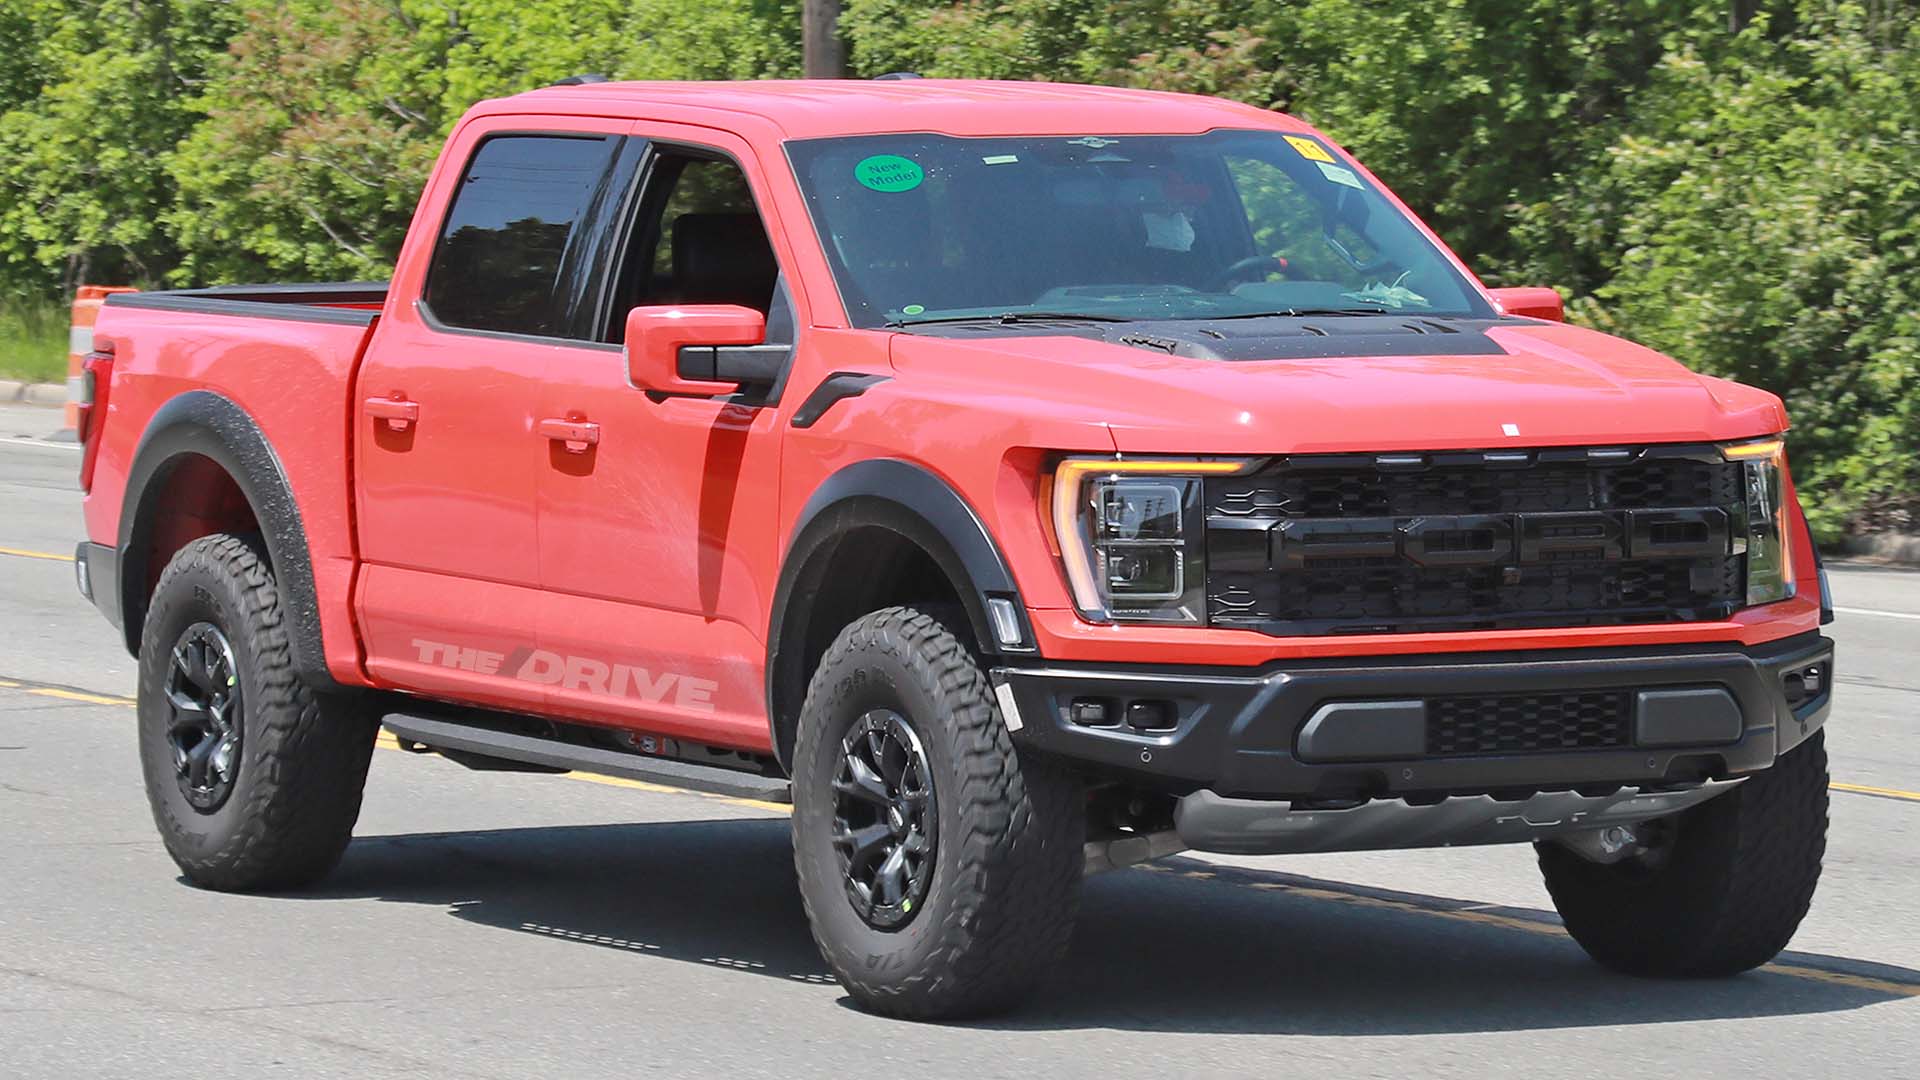 V8 Super Truck Finally Spied Without Camo